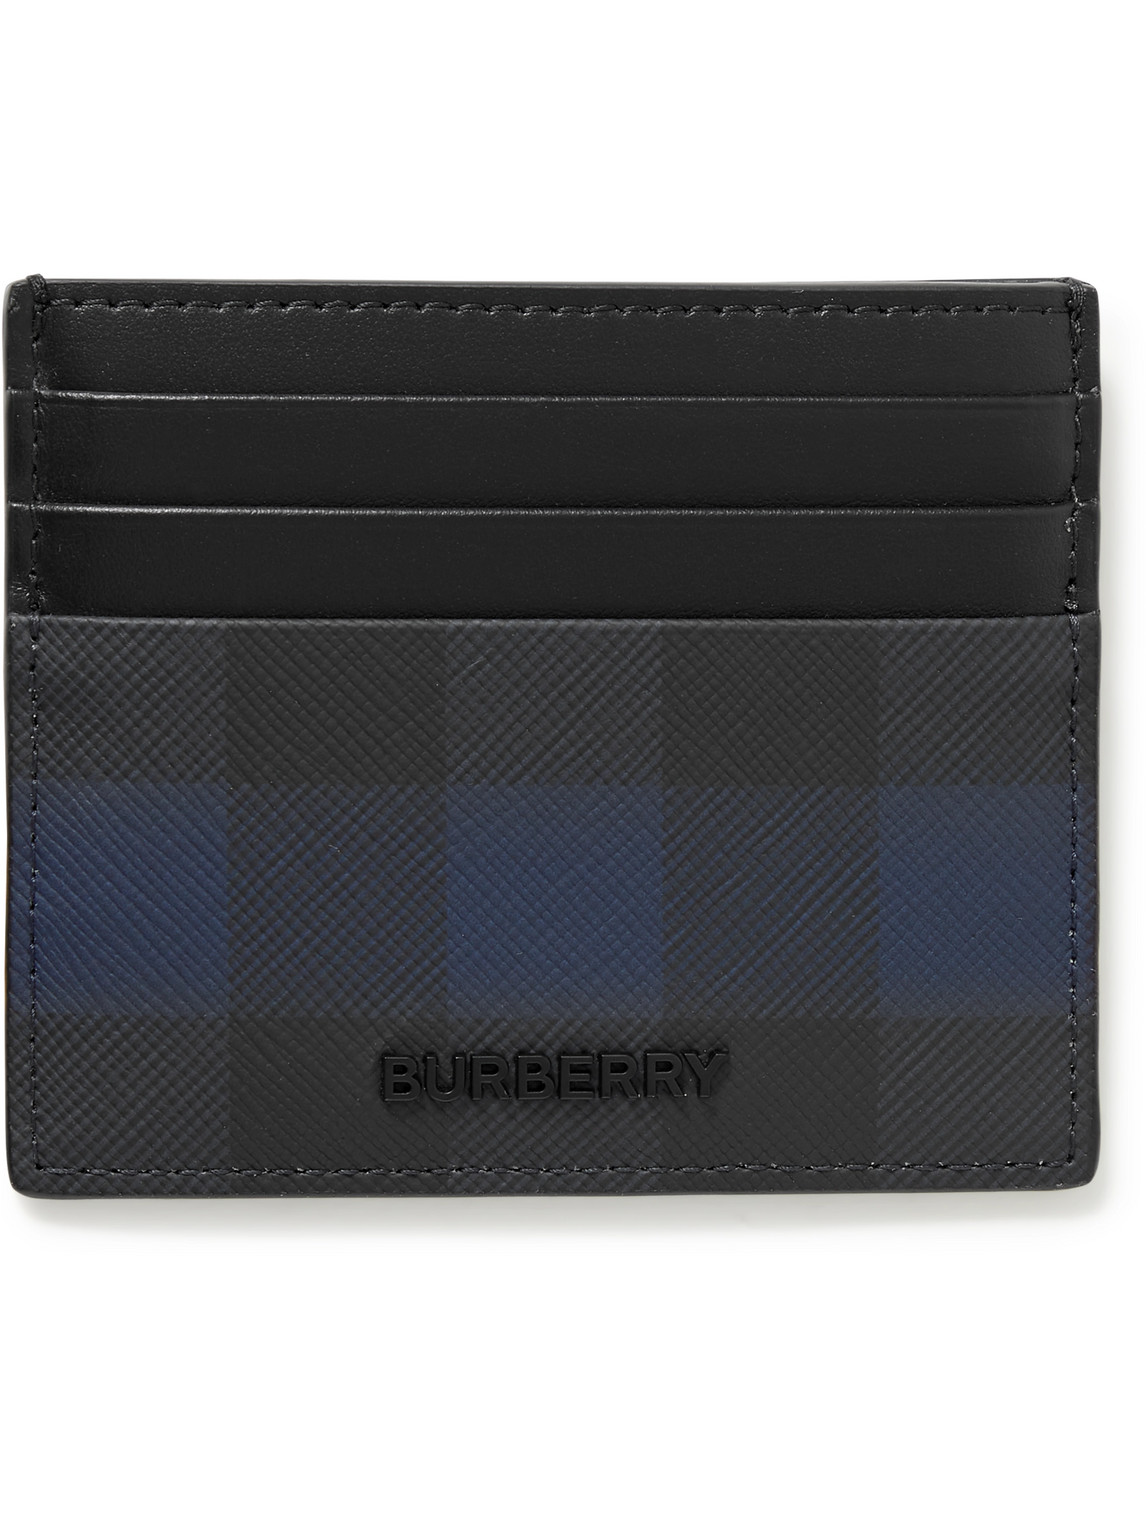 Burberry Check Cardholder Male Black In Blue